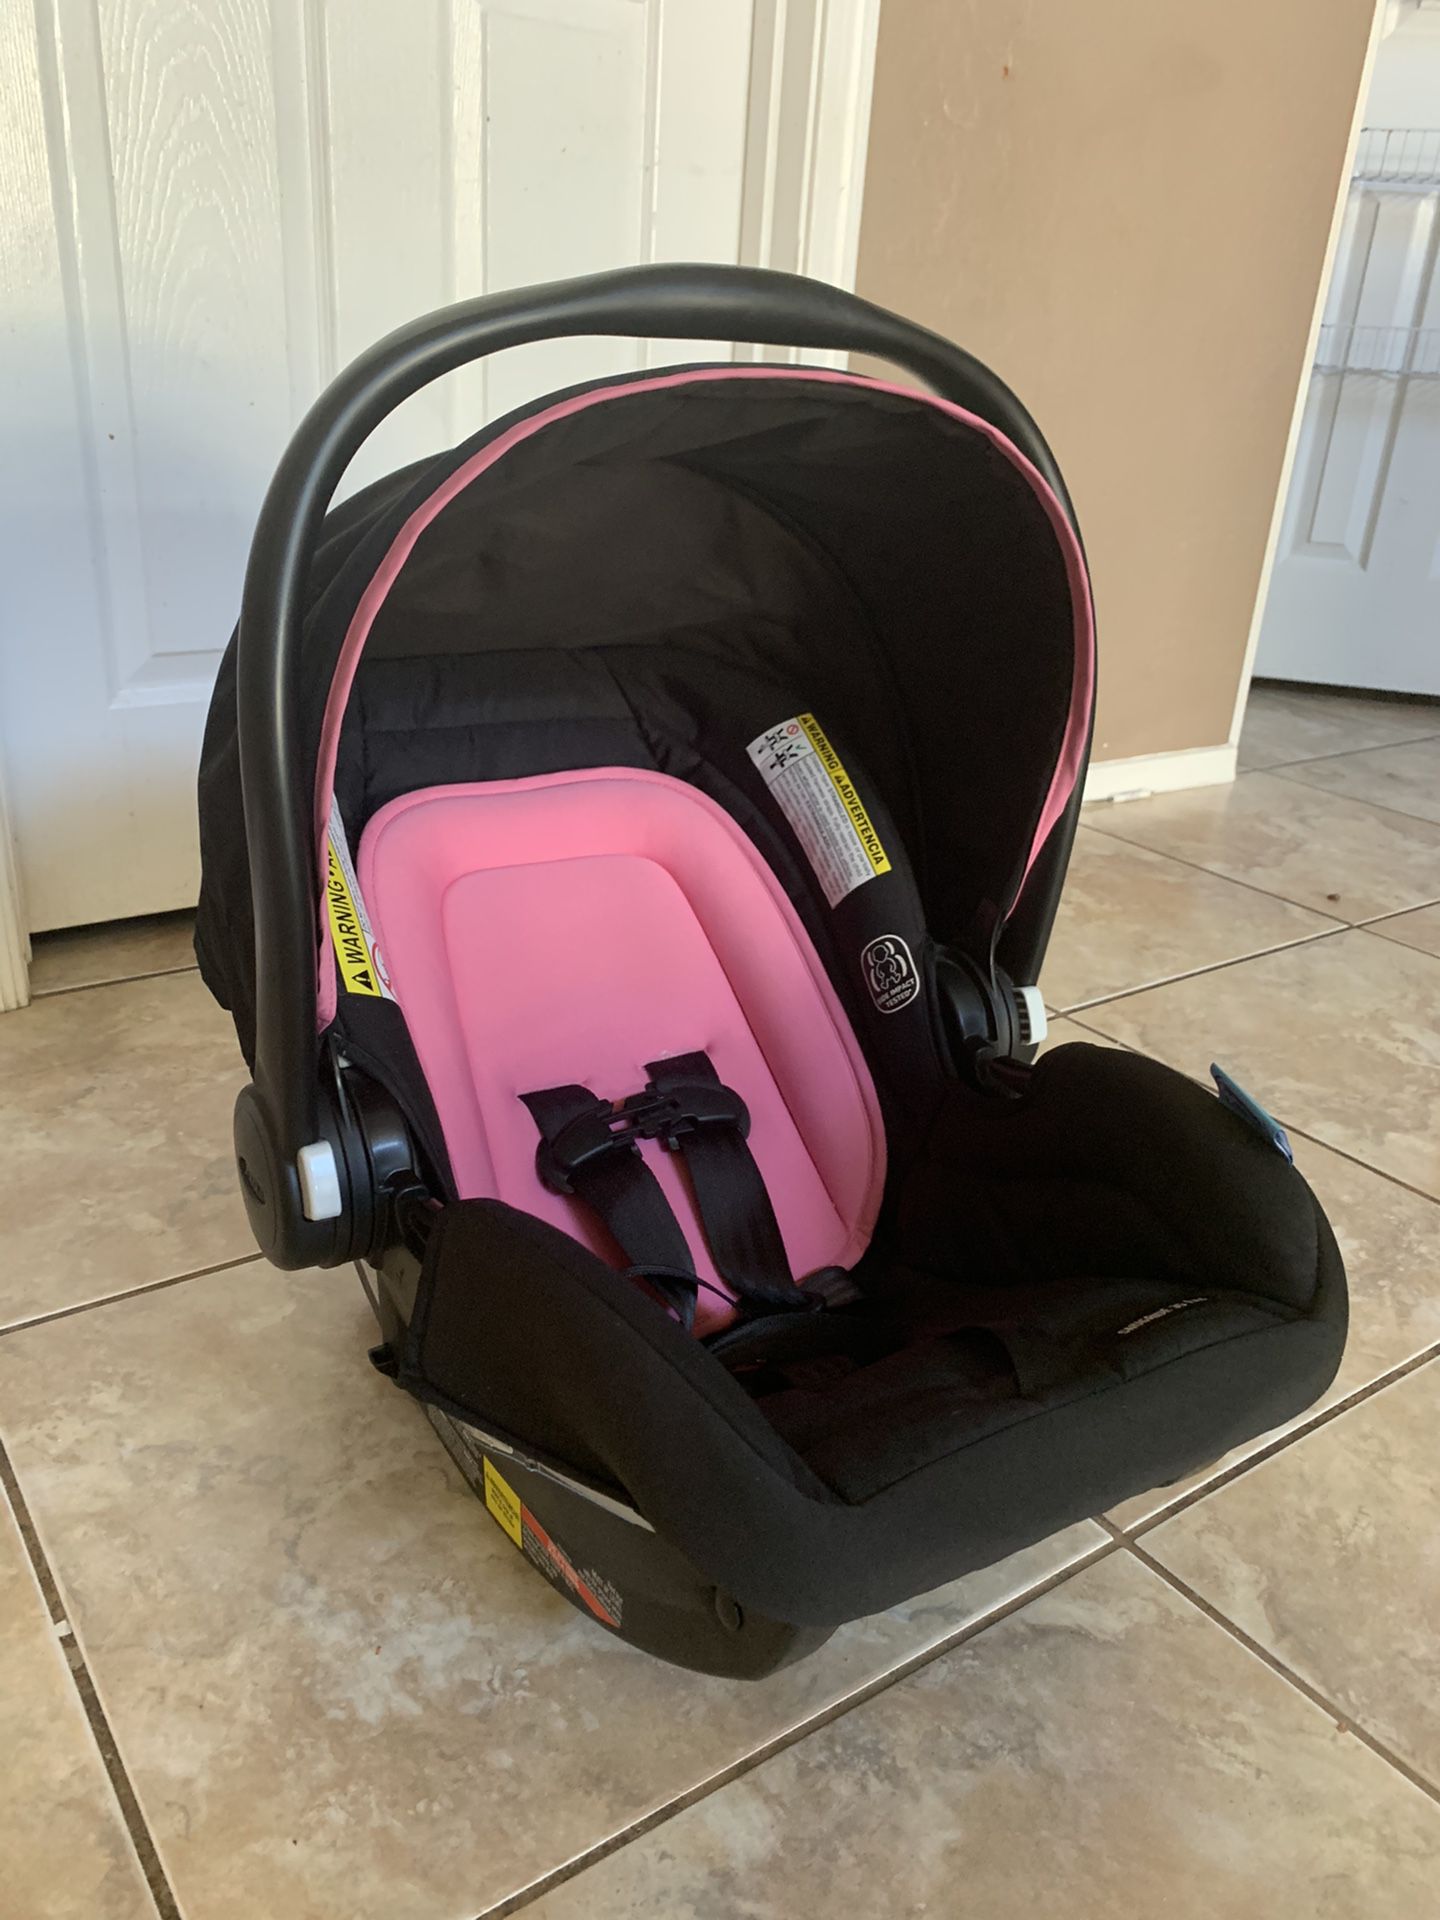 Barely used Graco car seat